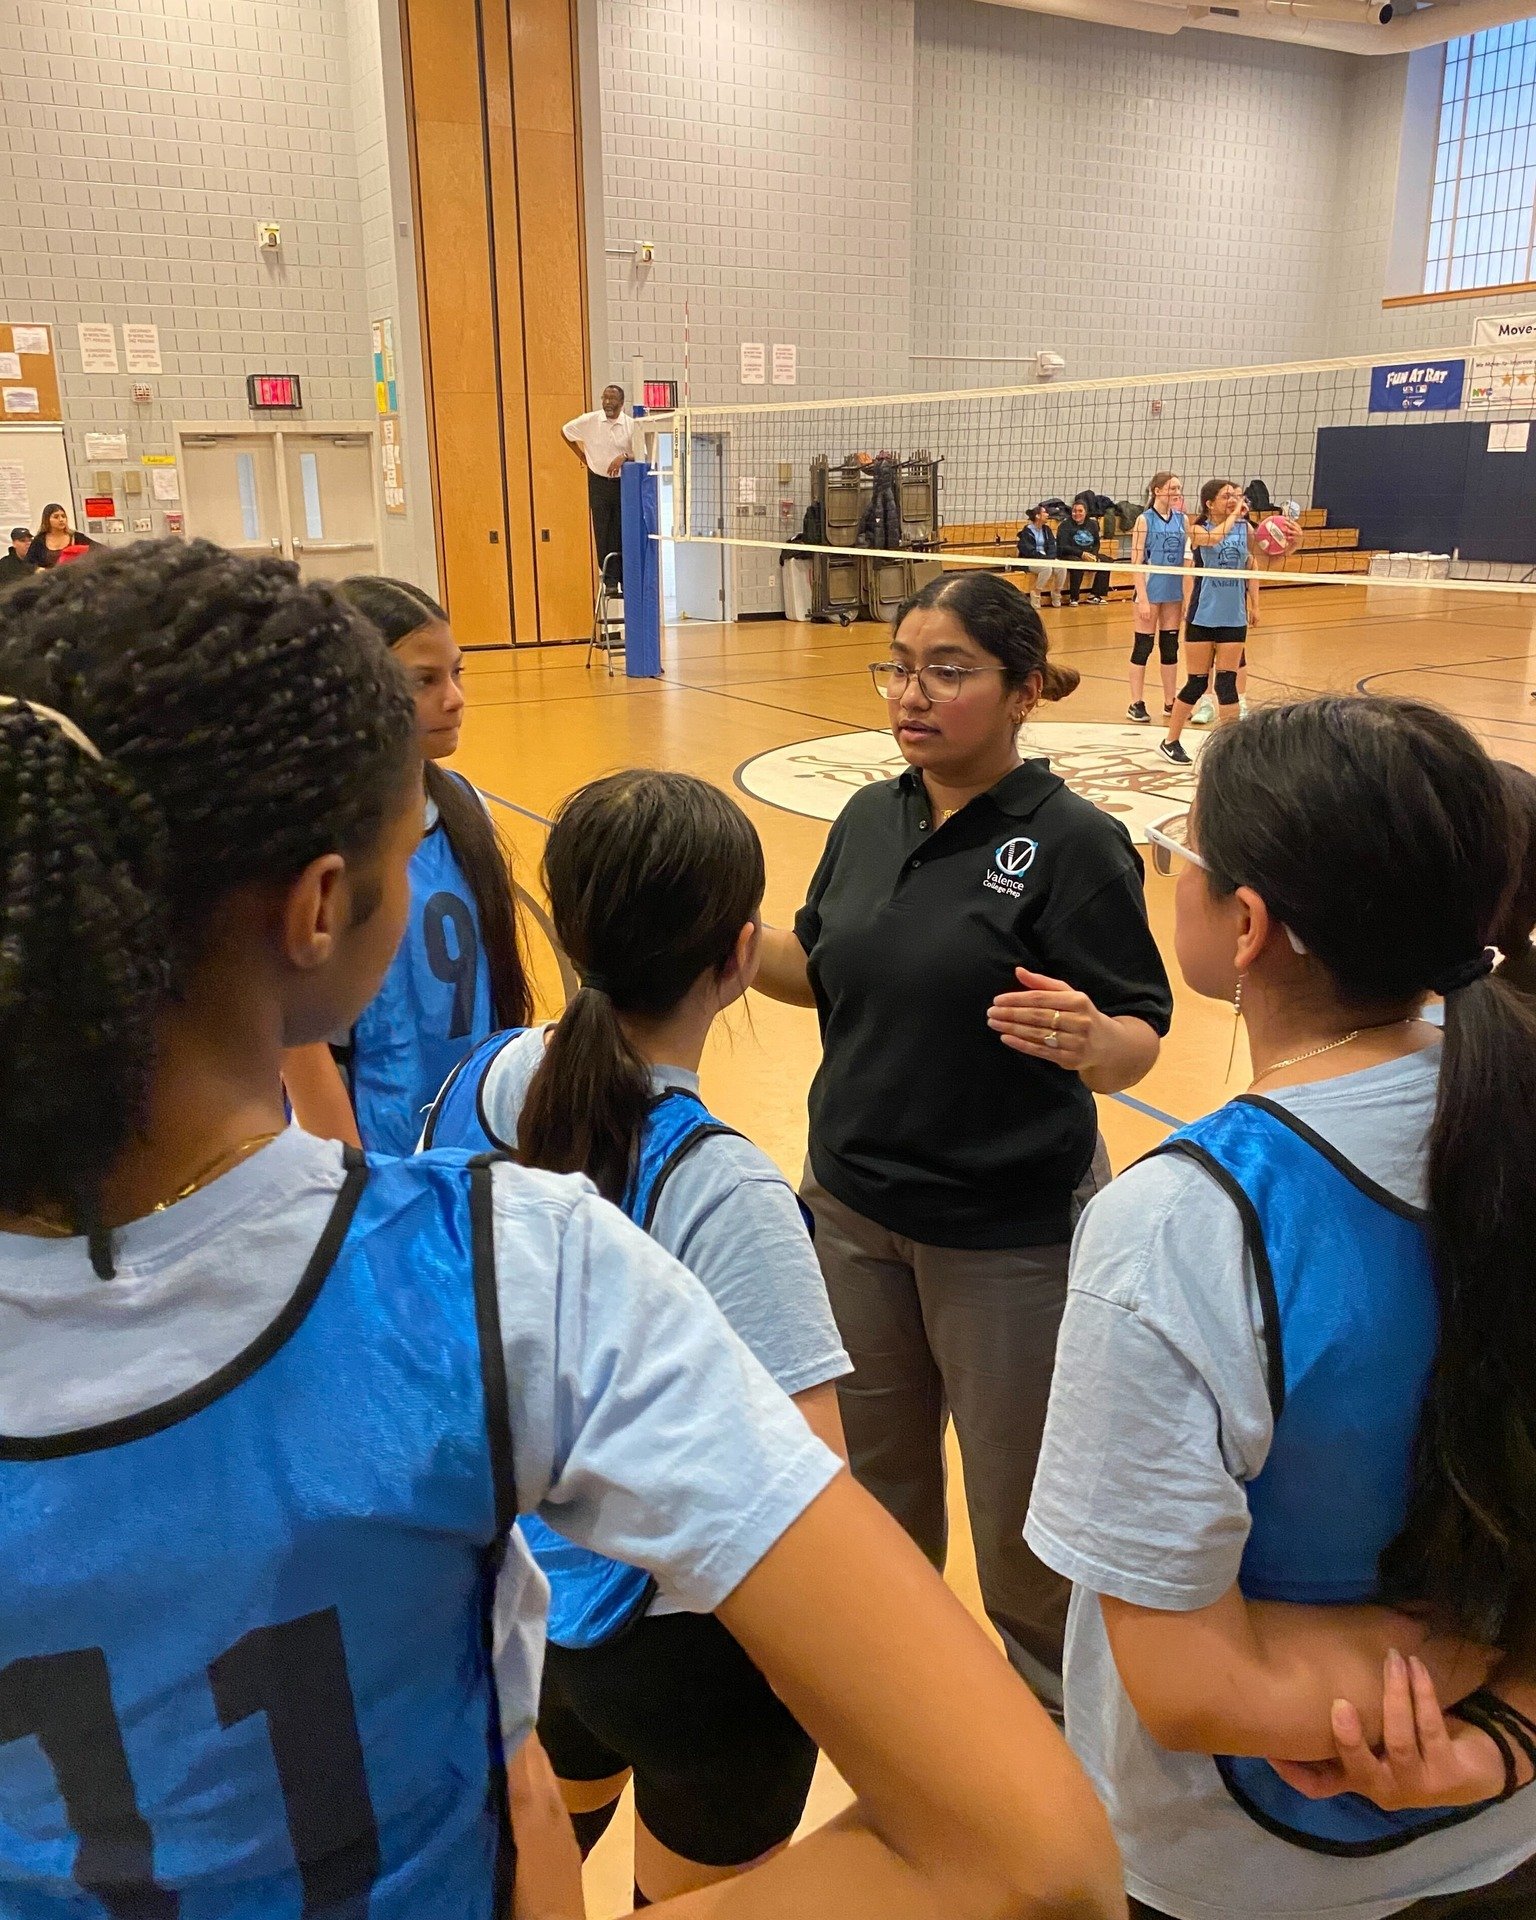 Some mid-game motivation from Coach Rahman! 🏐 #TheVCPStrikers #GirlsVolleyball